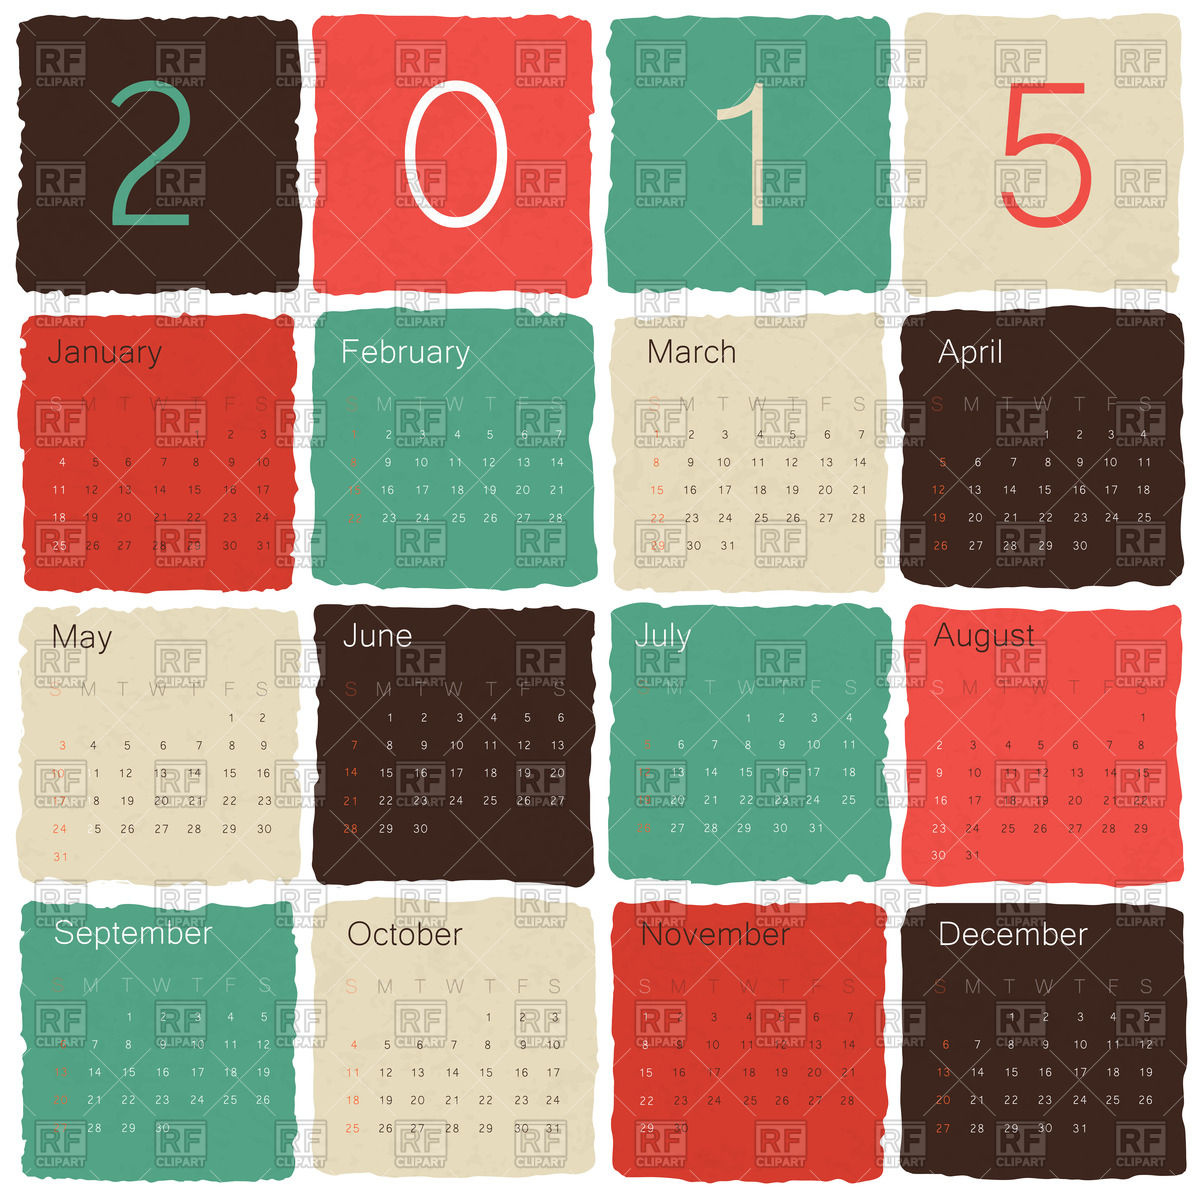 Calendar 2015 With Months In Separate Squares 46304 Calendars